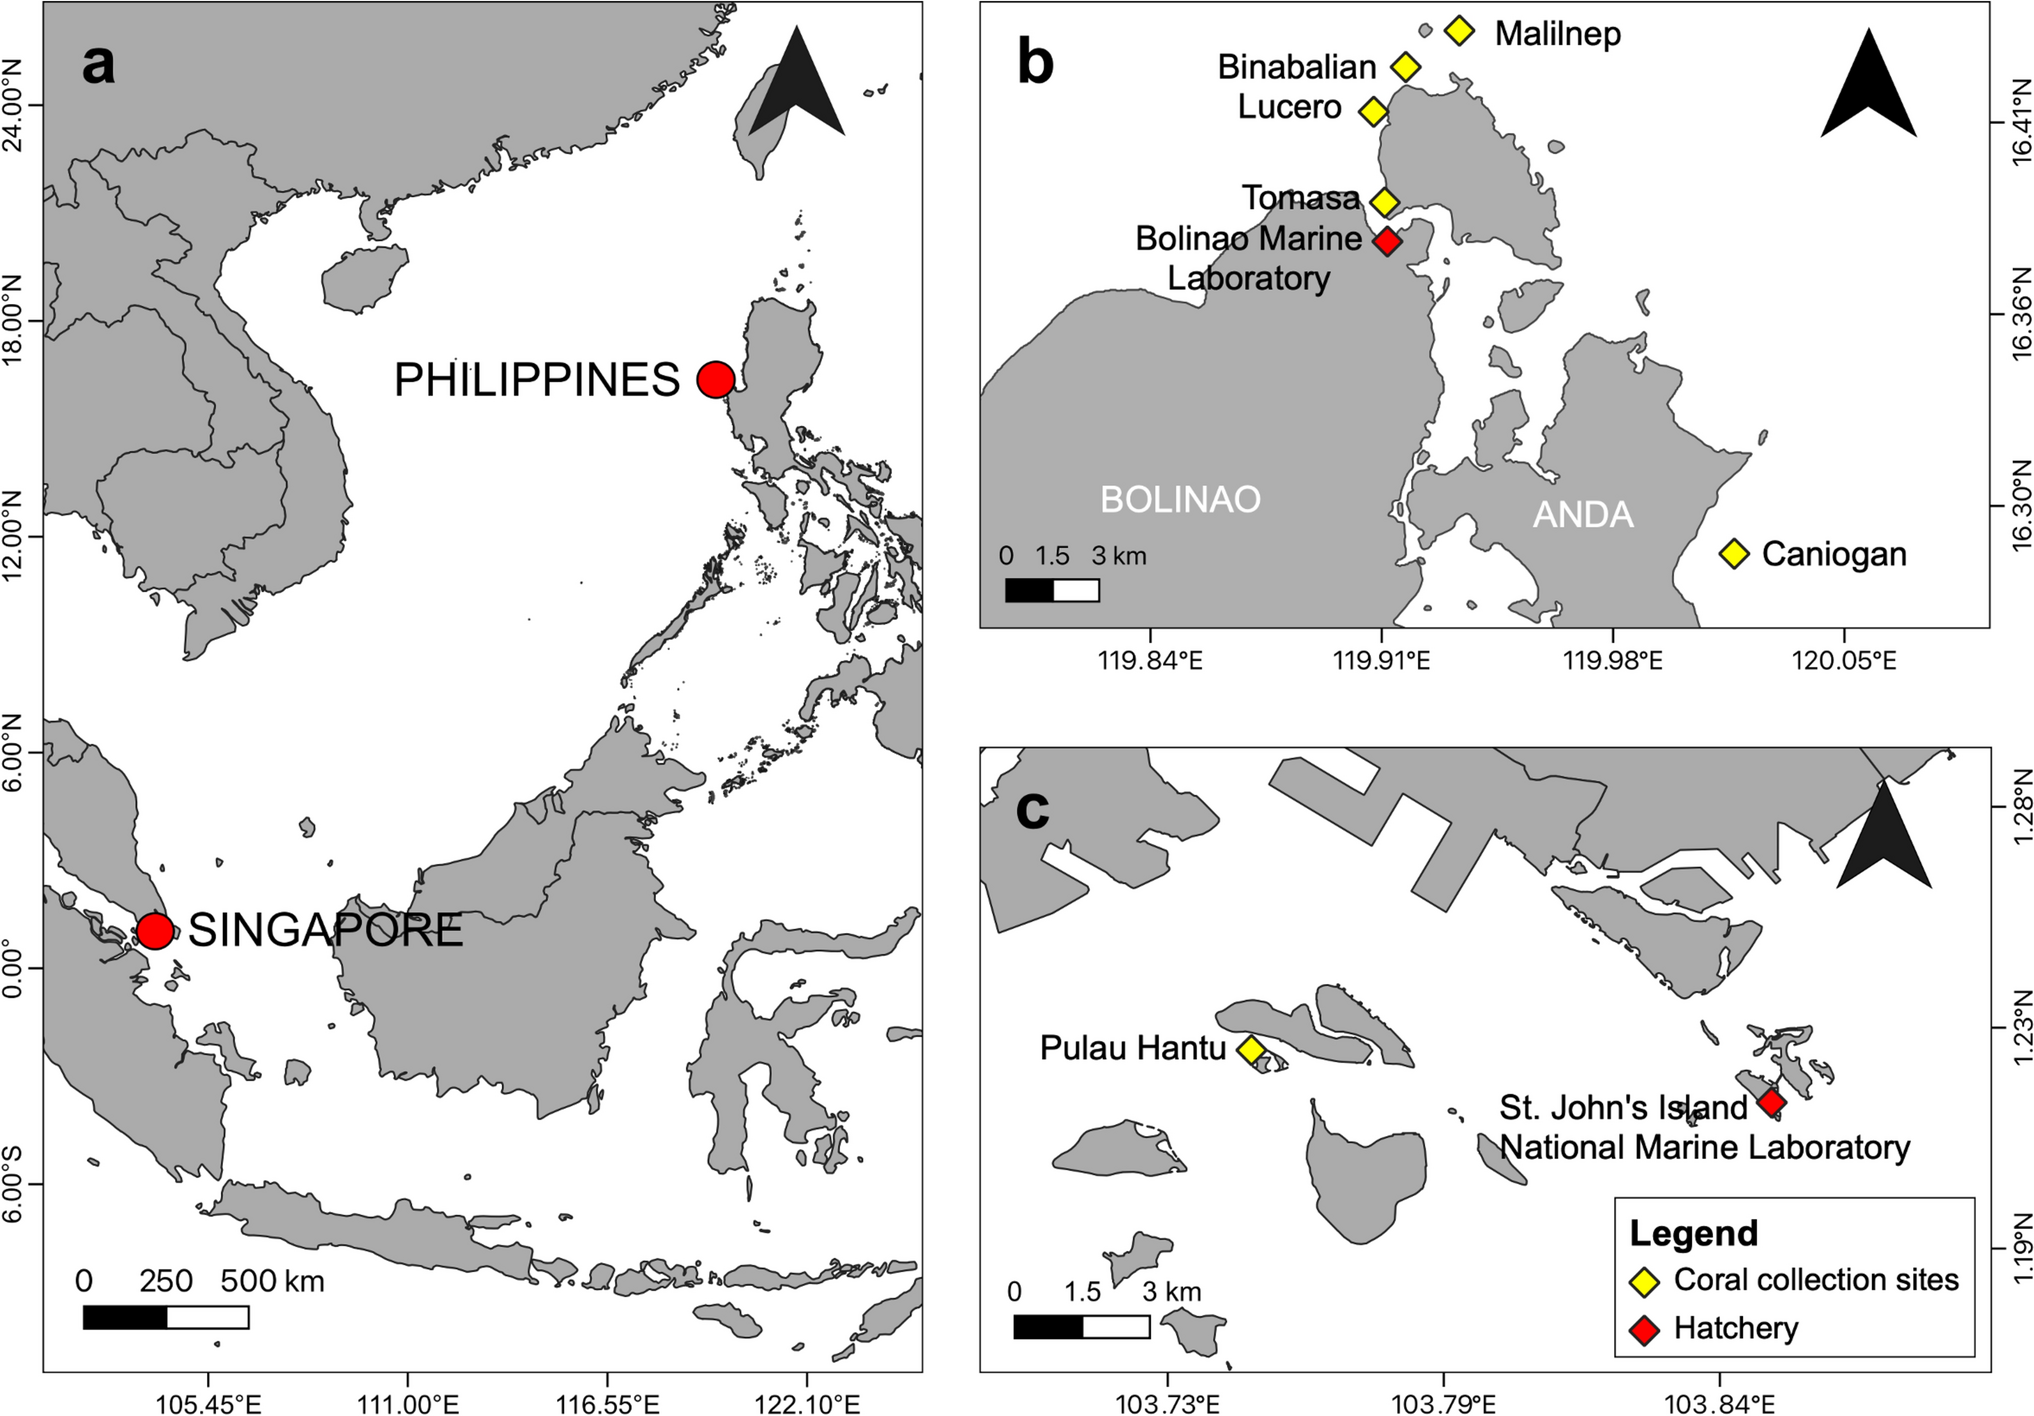 Reproductive biology and early life history of the solitary coral Heliofungia actiniformis from Singapore and the Philippines